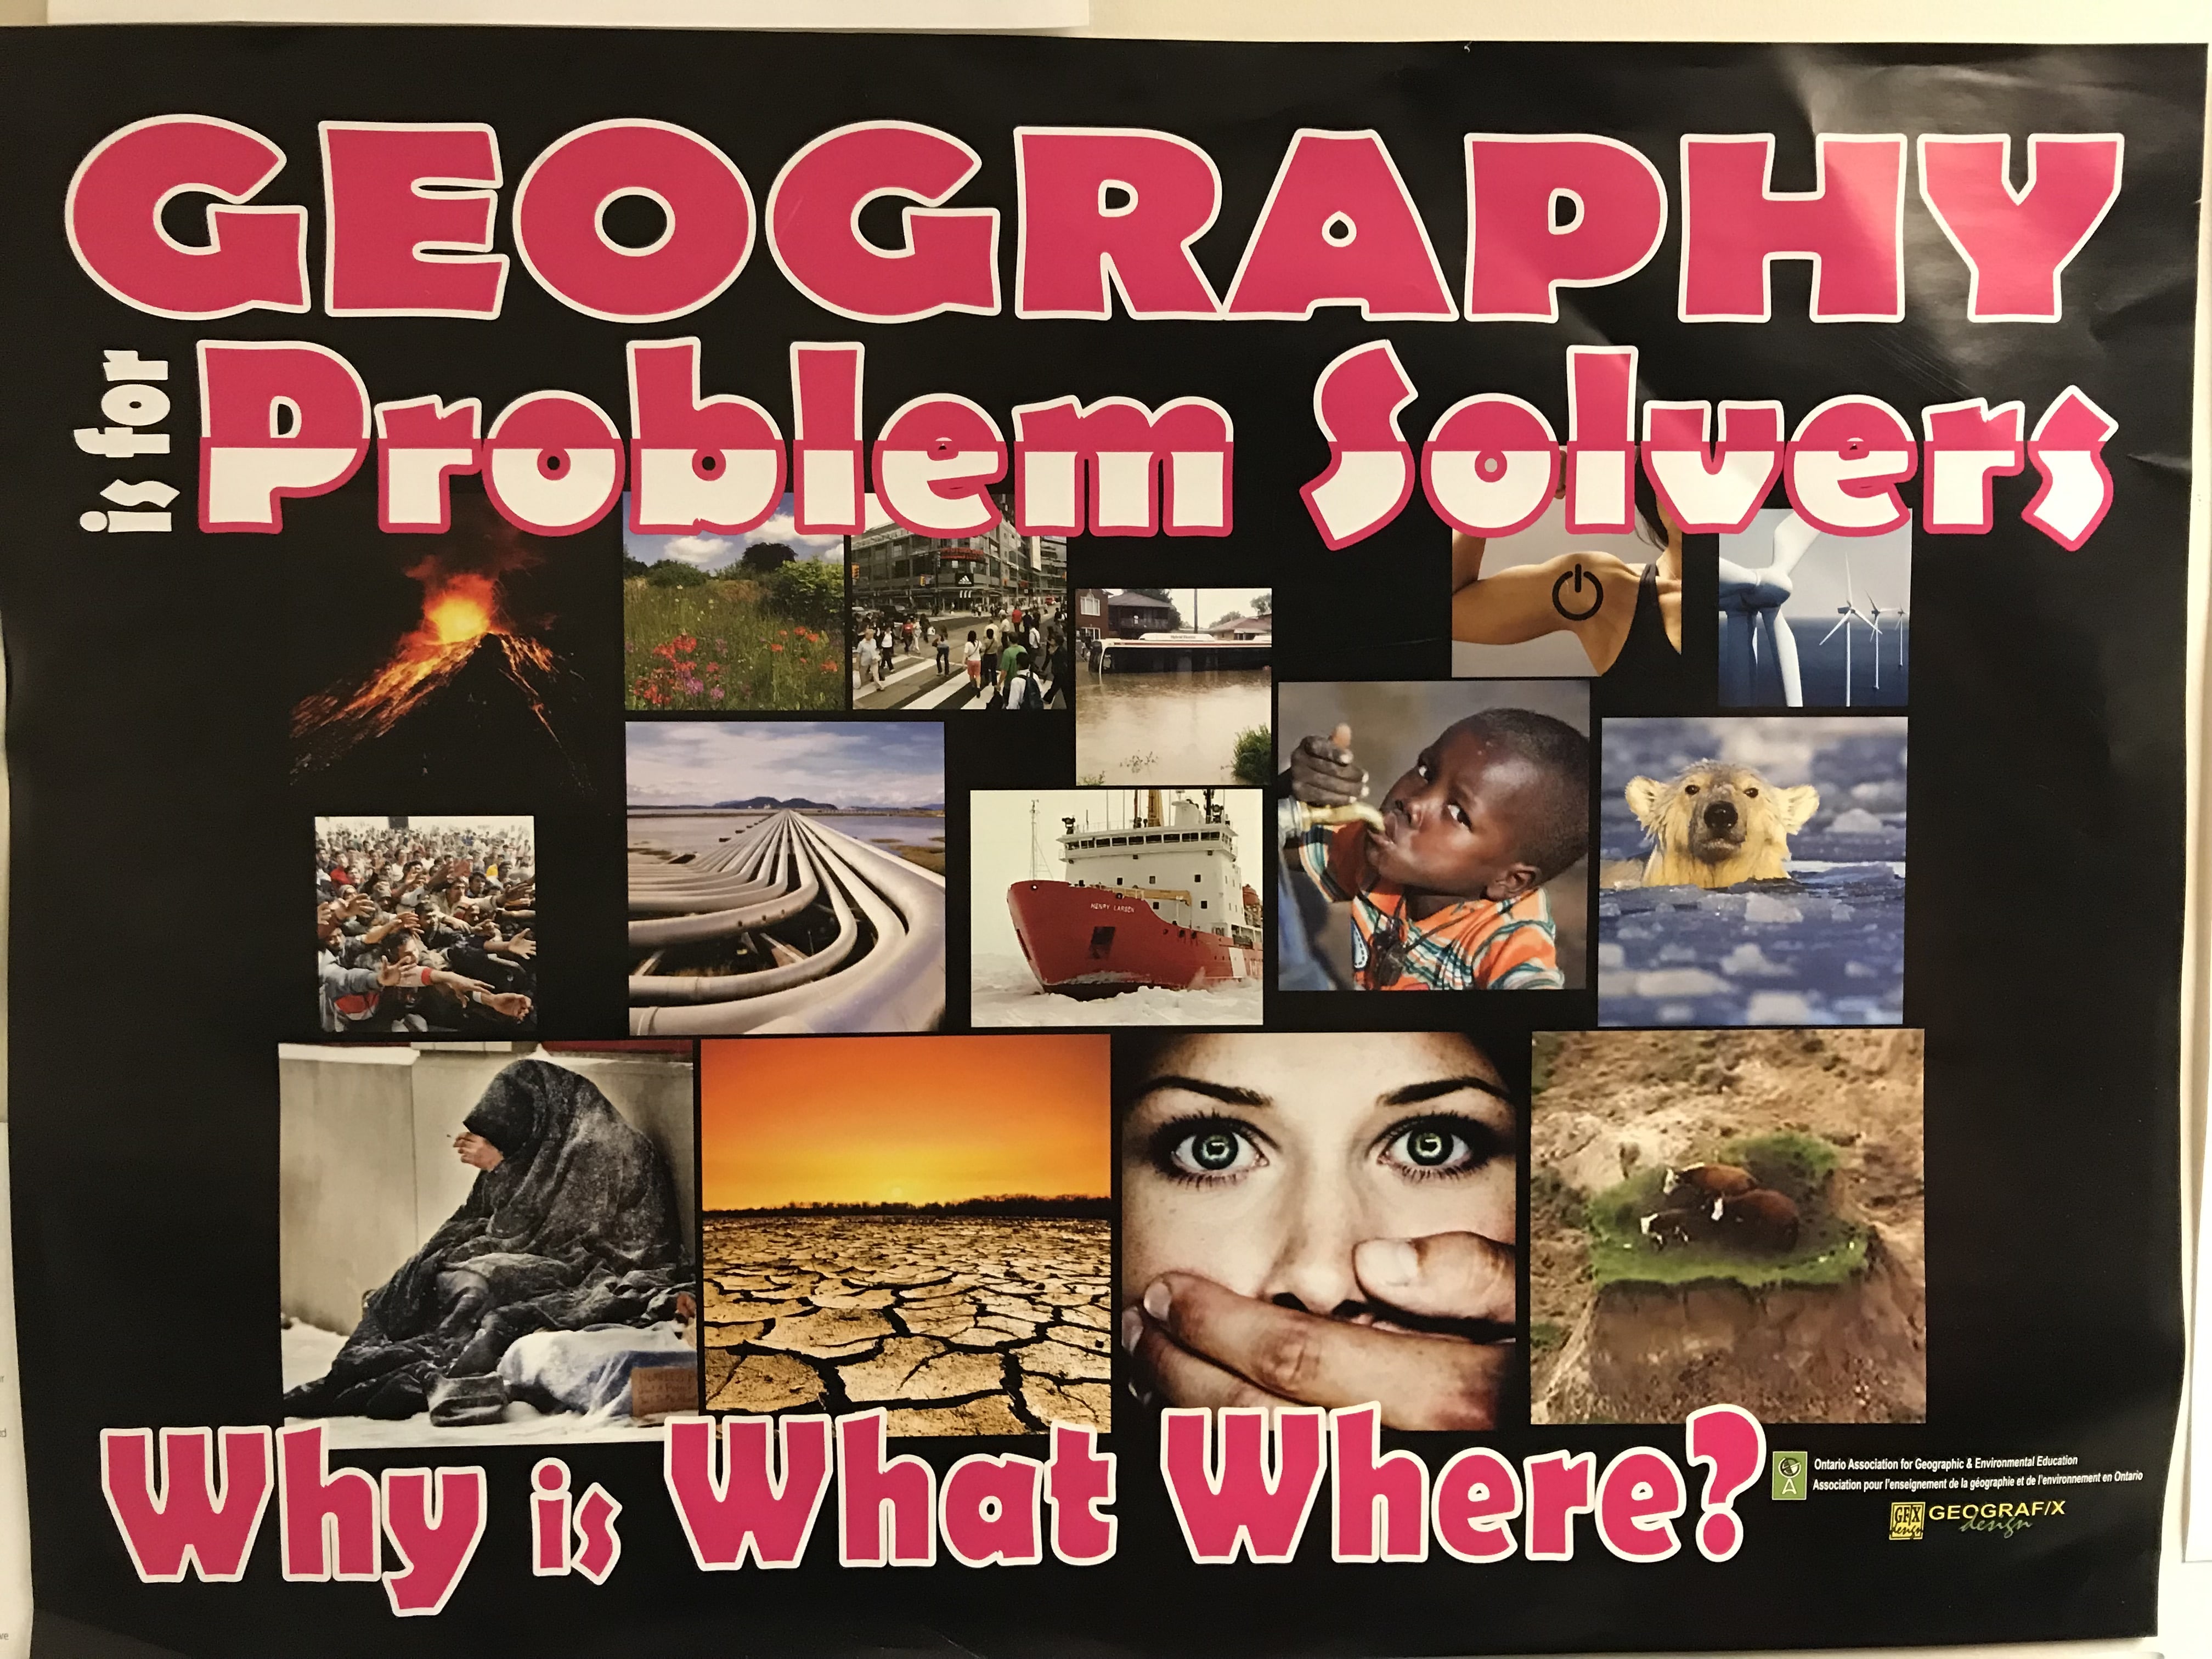 geo is for problem solvers